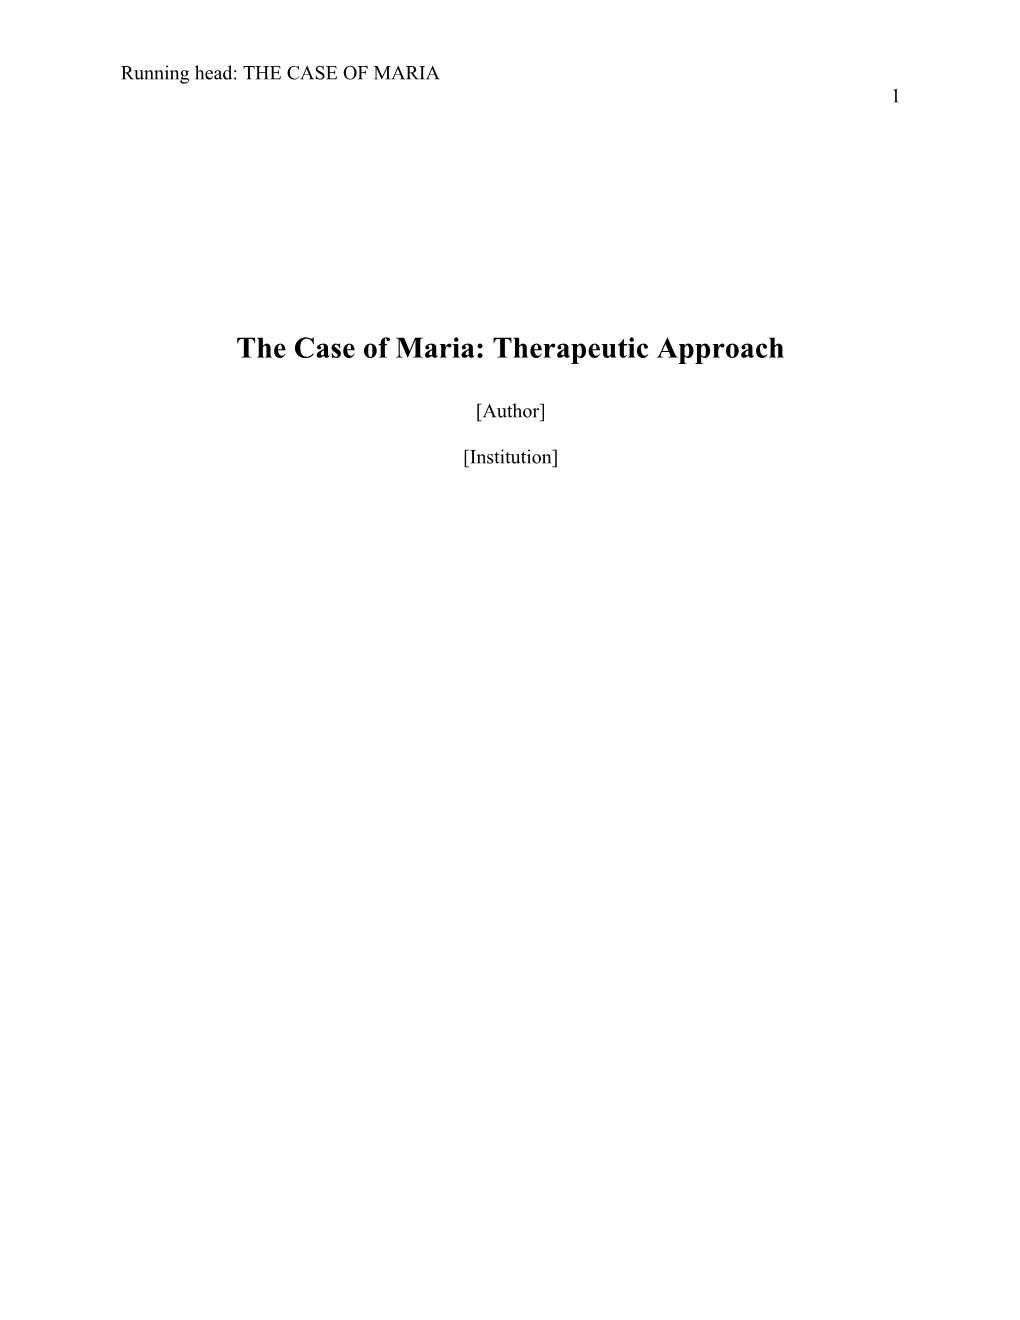 The Case of Maria: Therapeutic Approach